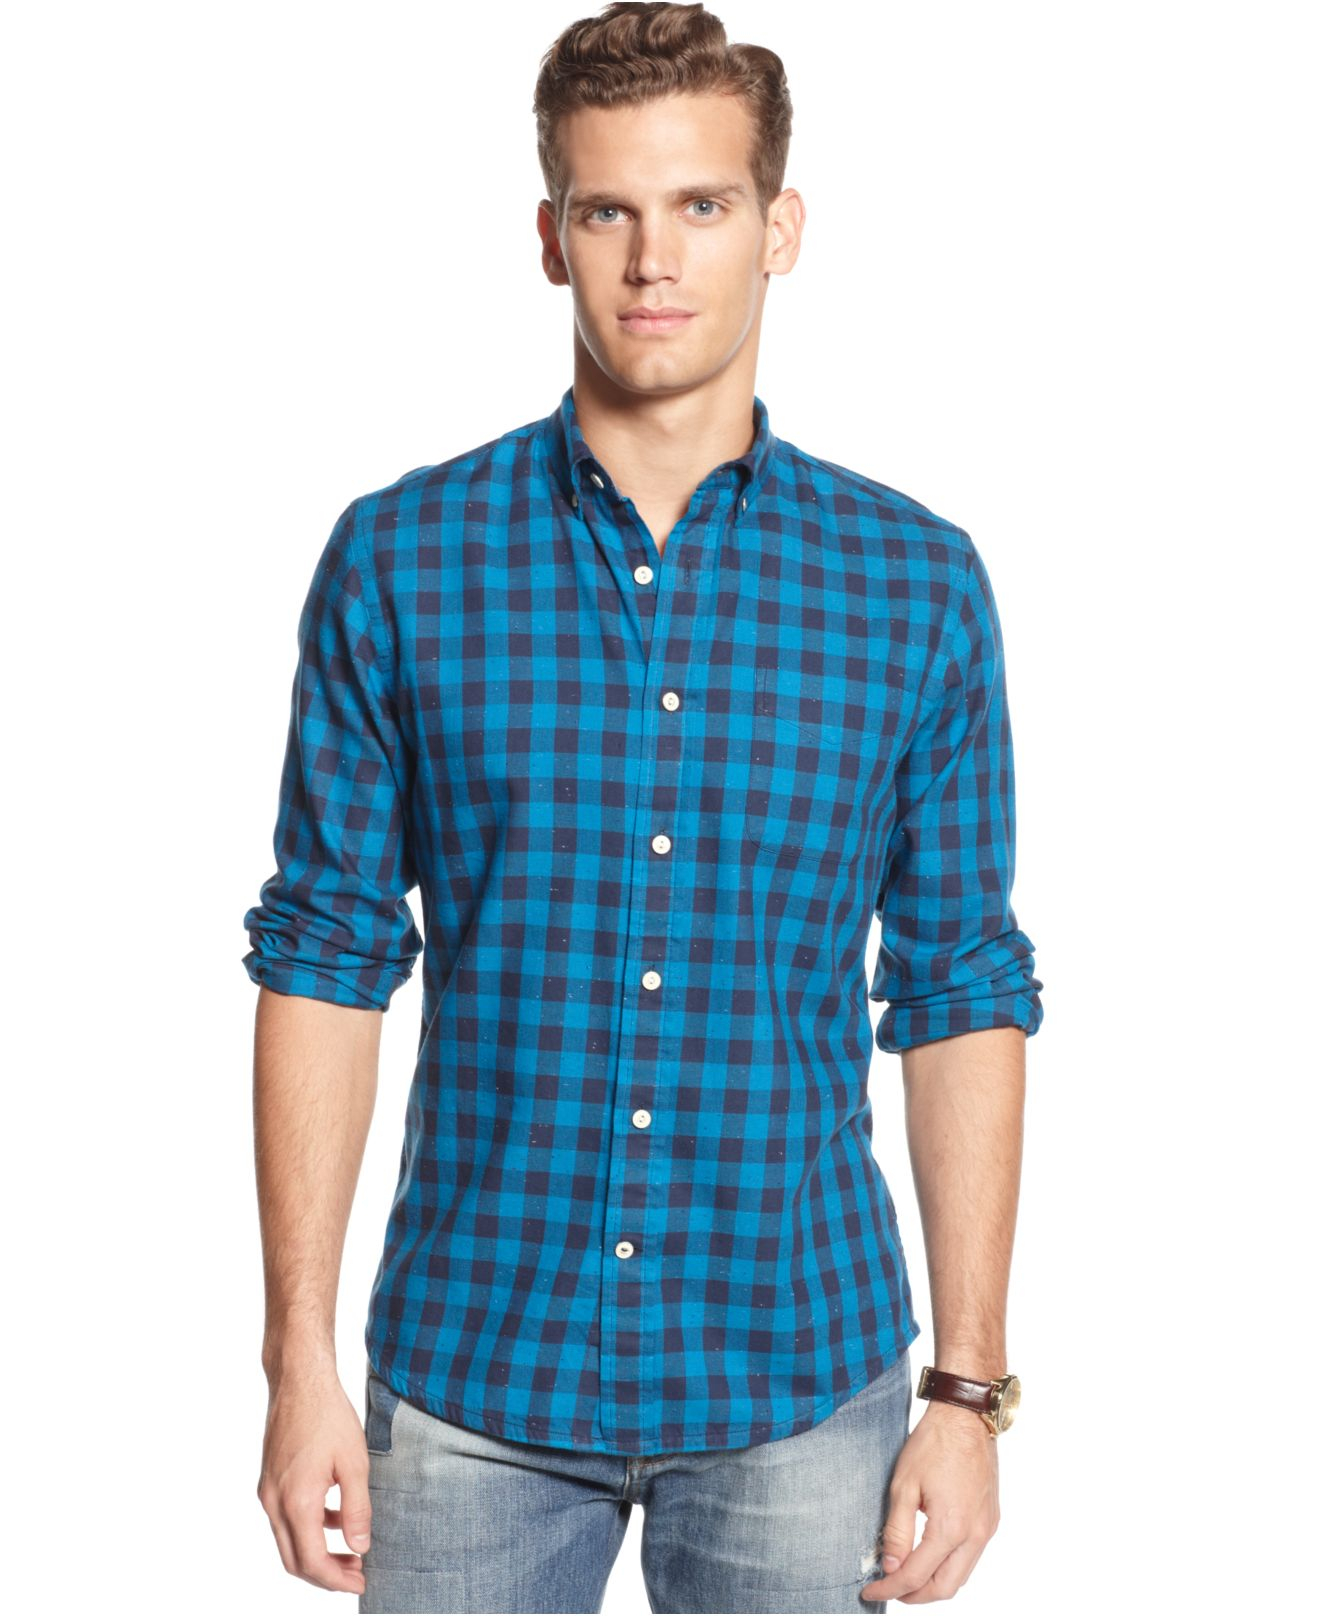 Lyst - Tommy Hilfiger Square Knot Gingham Shirt in Blue for Men